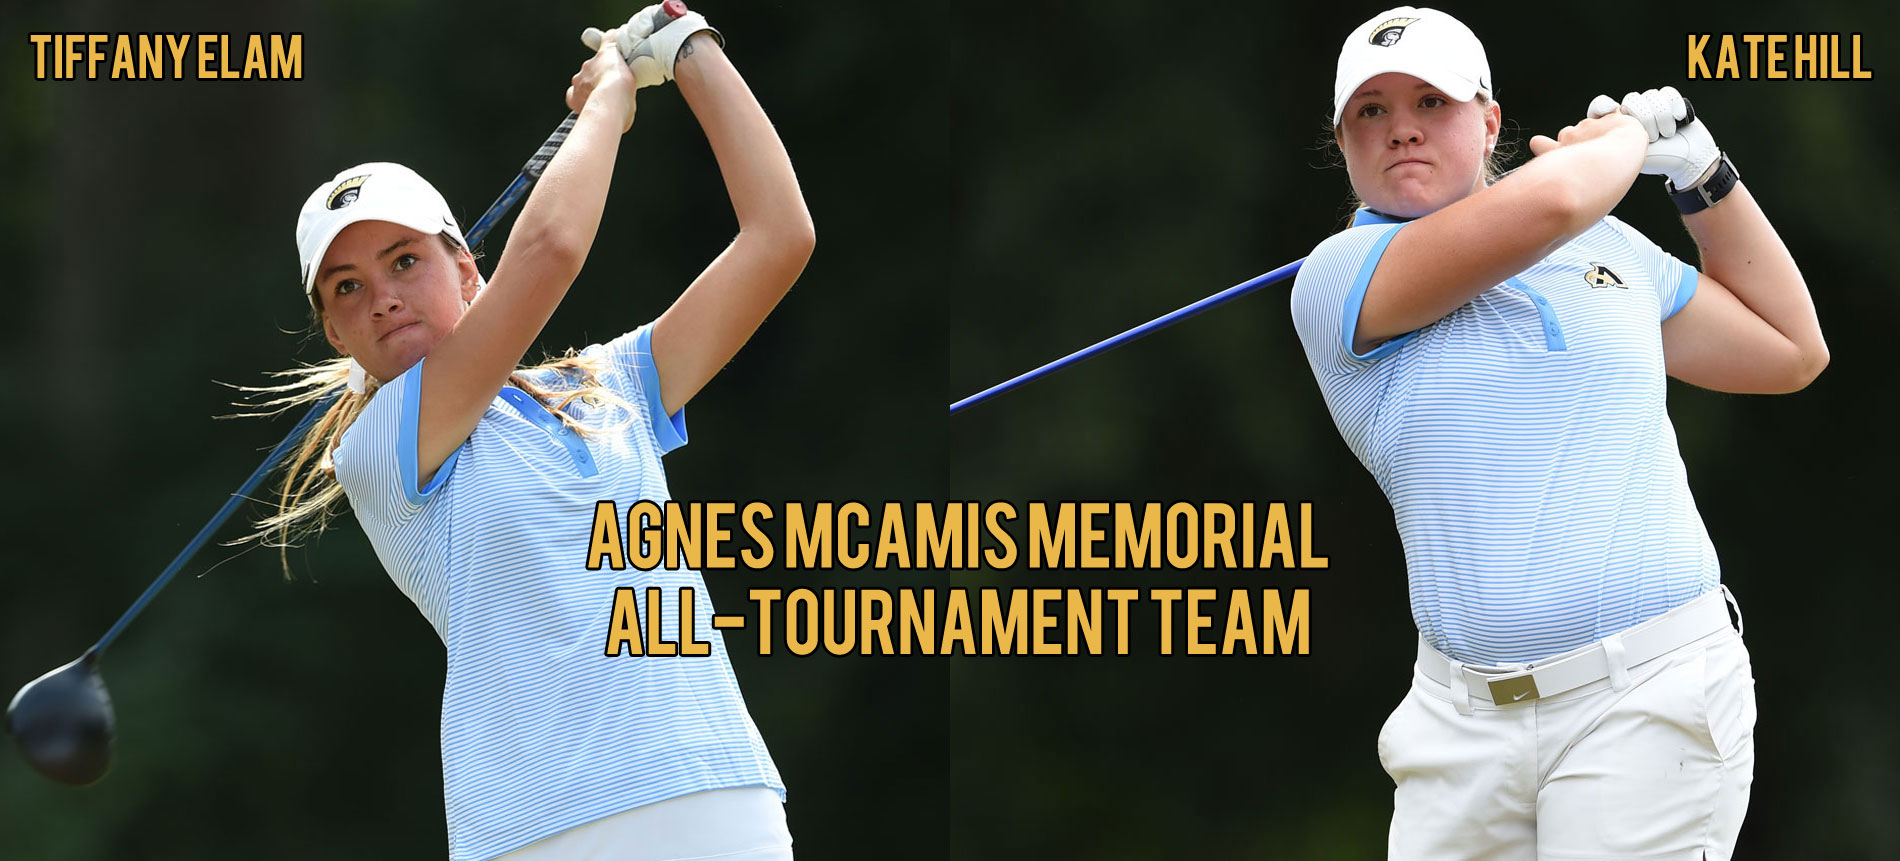 Elam and Hill Earn All-Tournament Honors at Tusculum’s Agnes McAmis Memorial